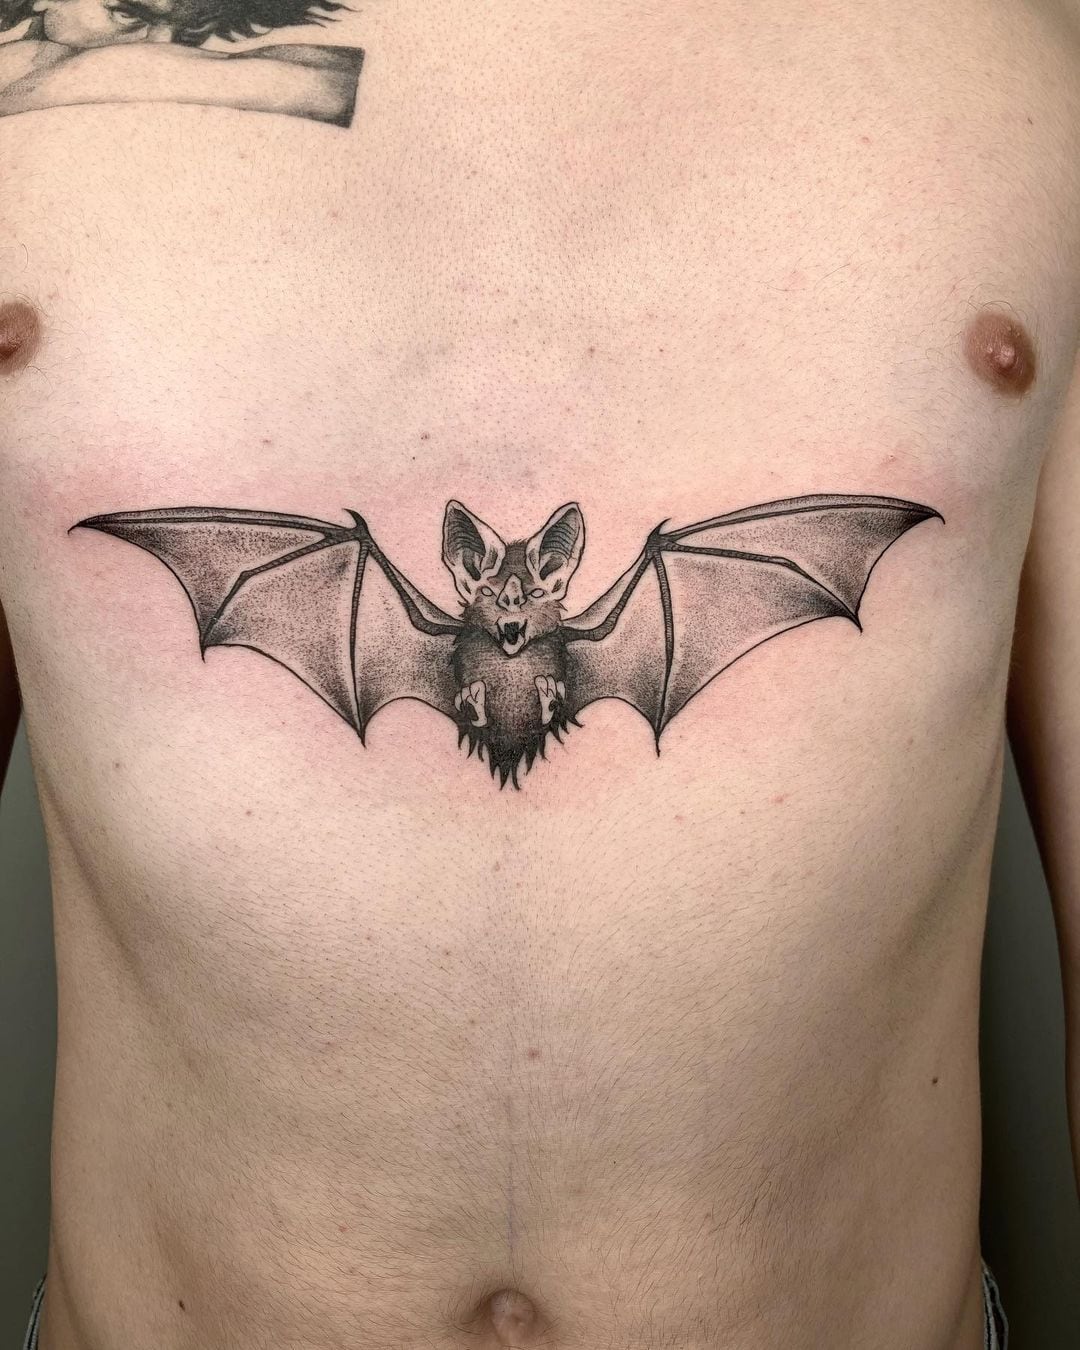 Tattoo uploaded by Stacie Mayer • This megabat wants all the fruits! Tattoo  by Torie Wartooth. #neotraditional #fruit #bat #fruitbat #TorieWartooth •  Tattoodo